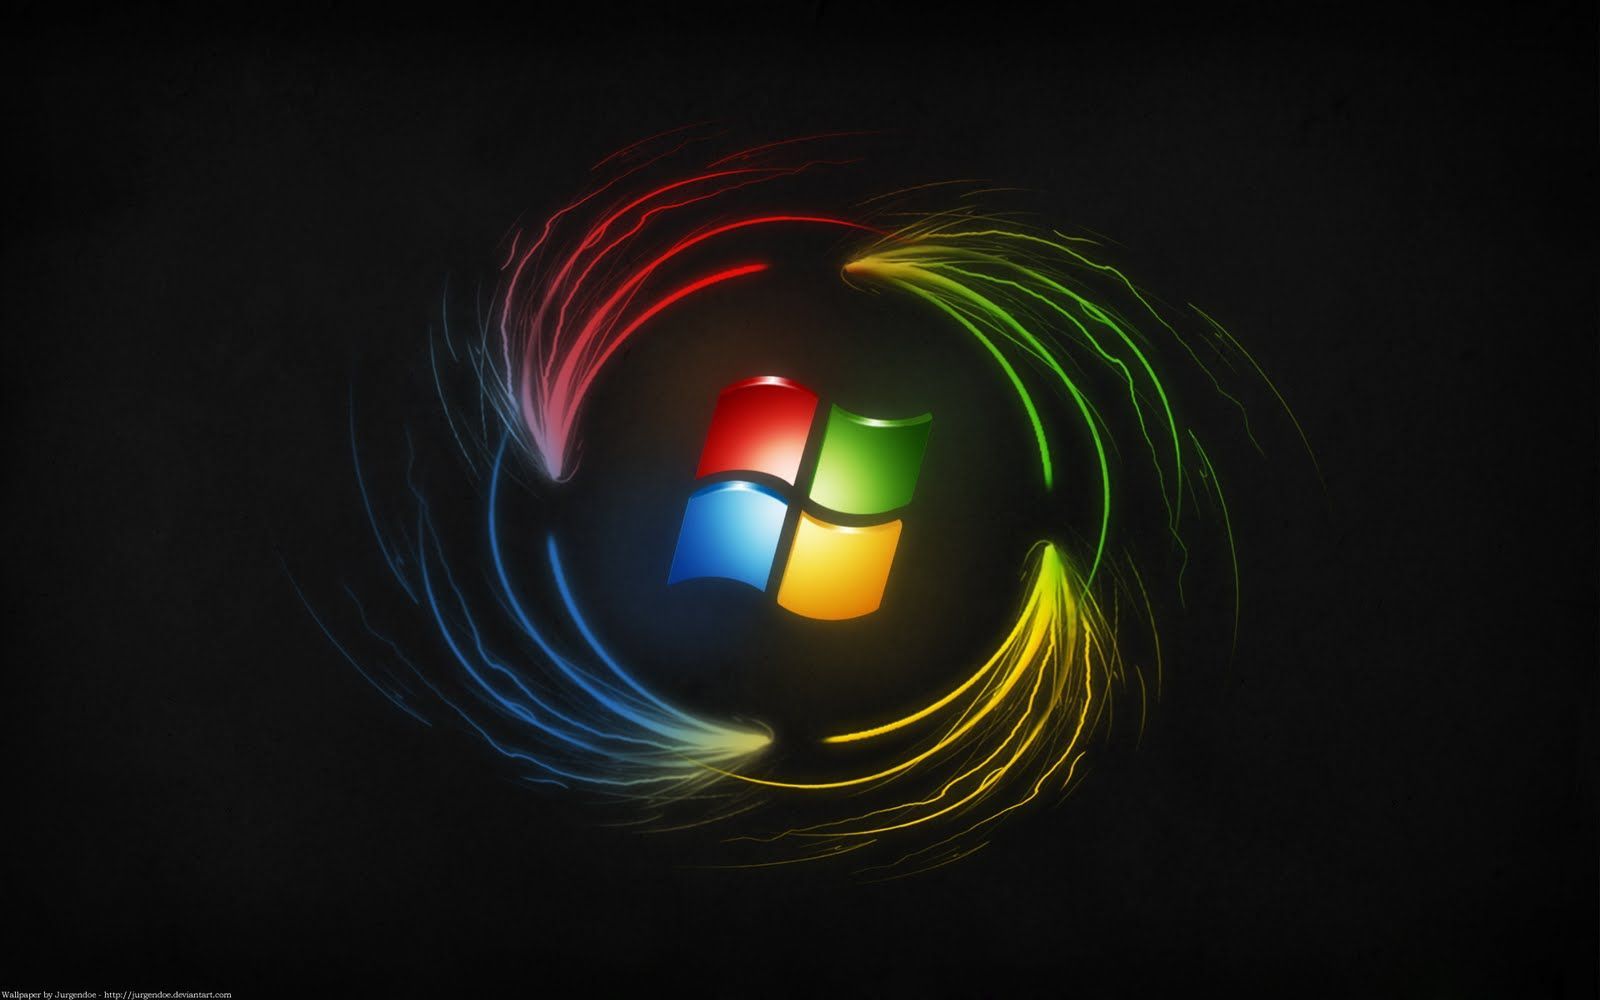 File Name Windows 8 Hd Wallpaper Posted Admin Category Windows